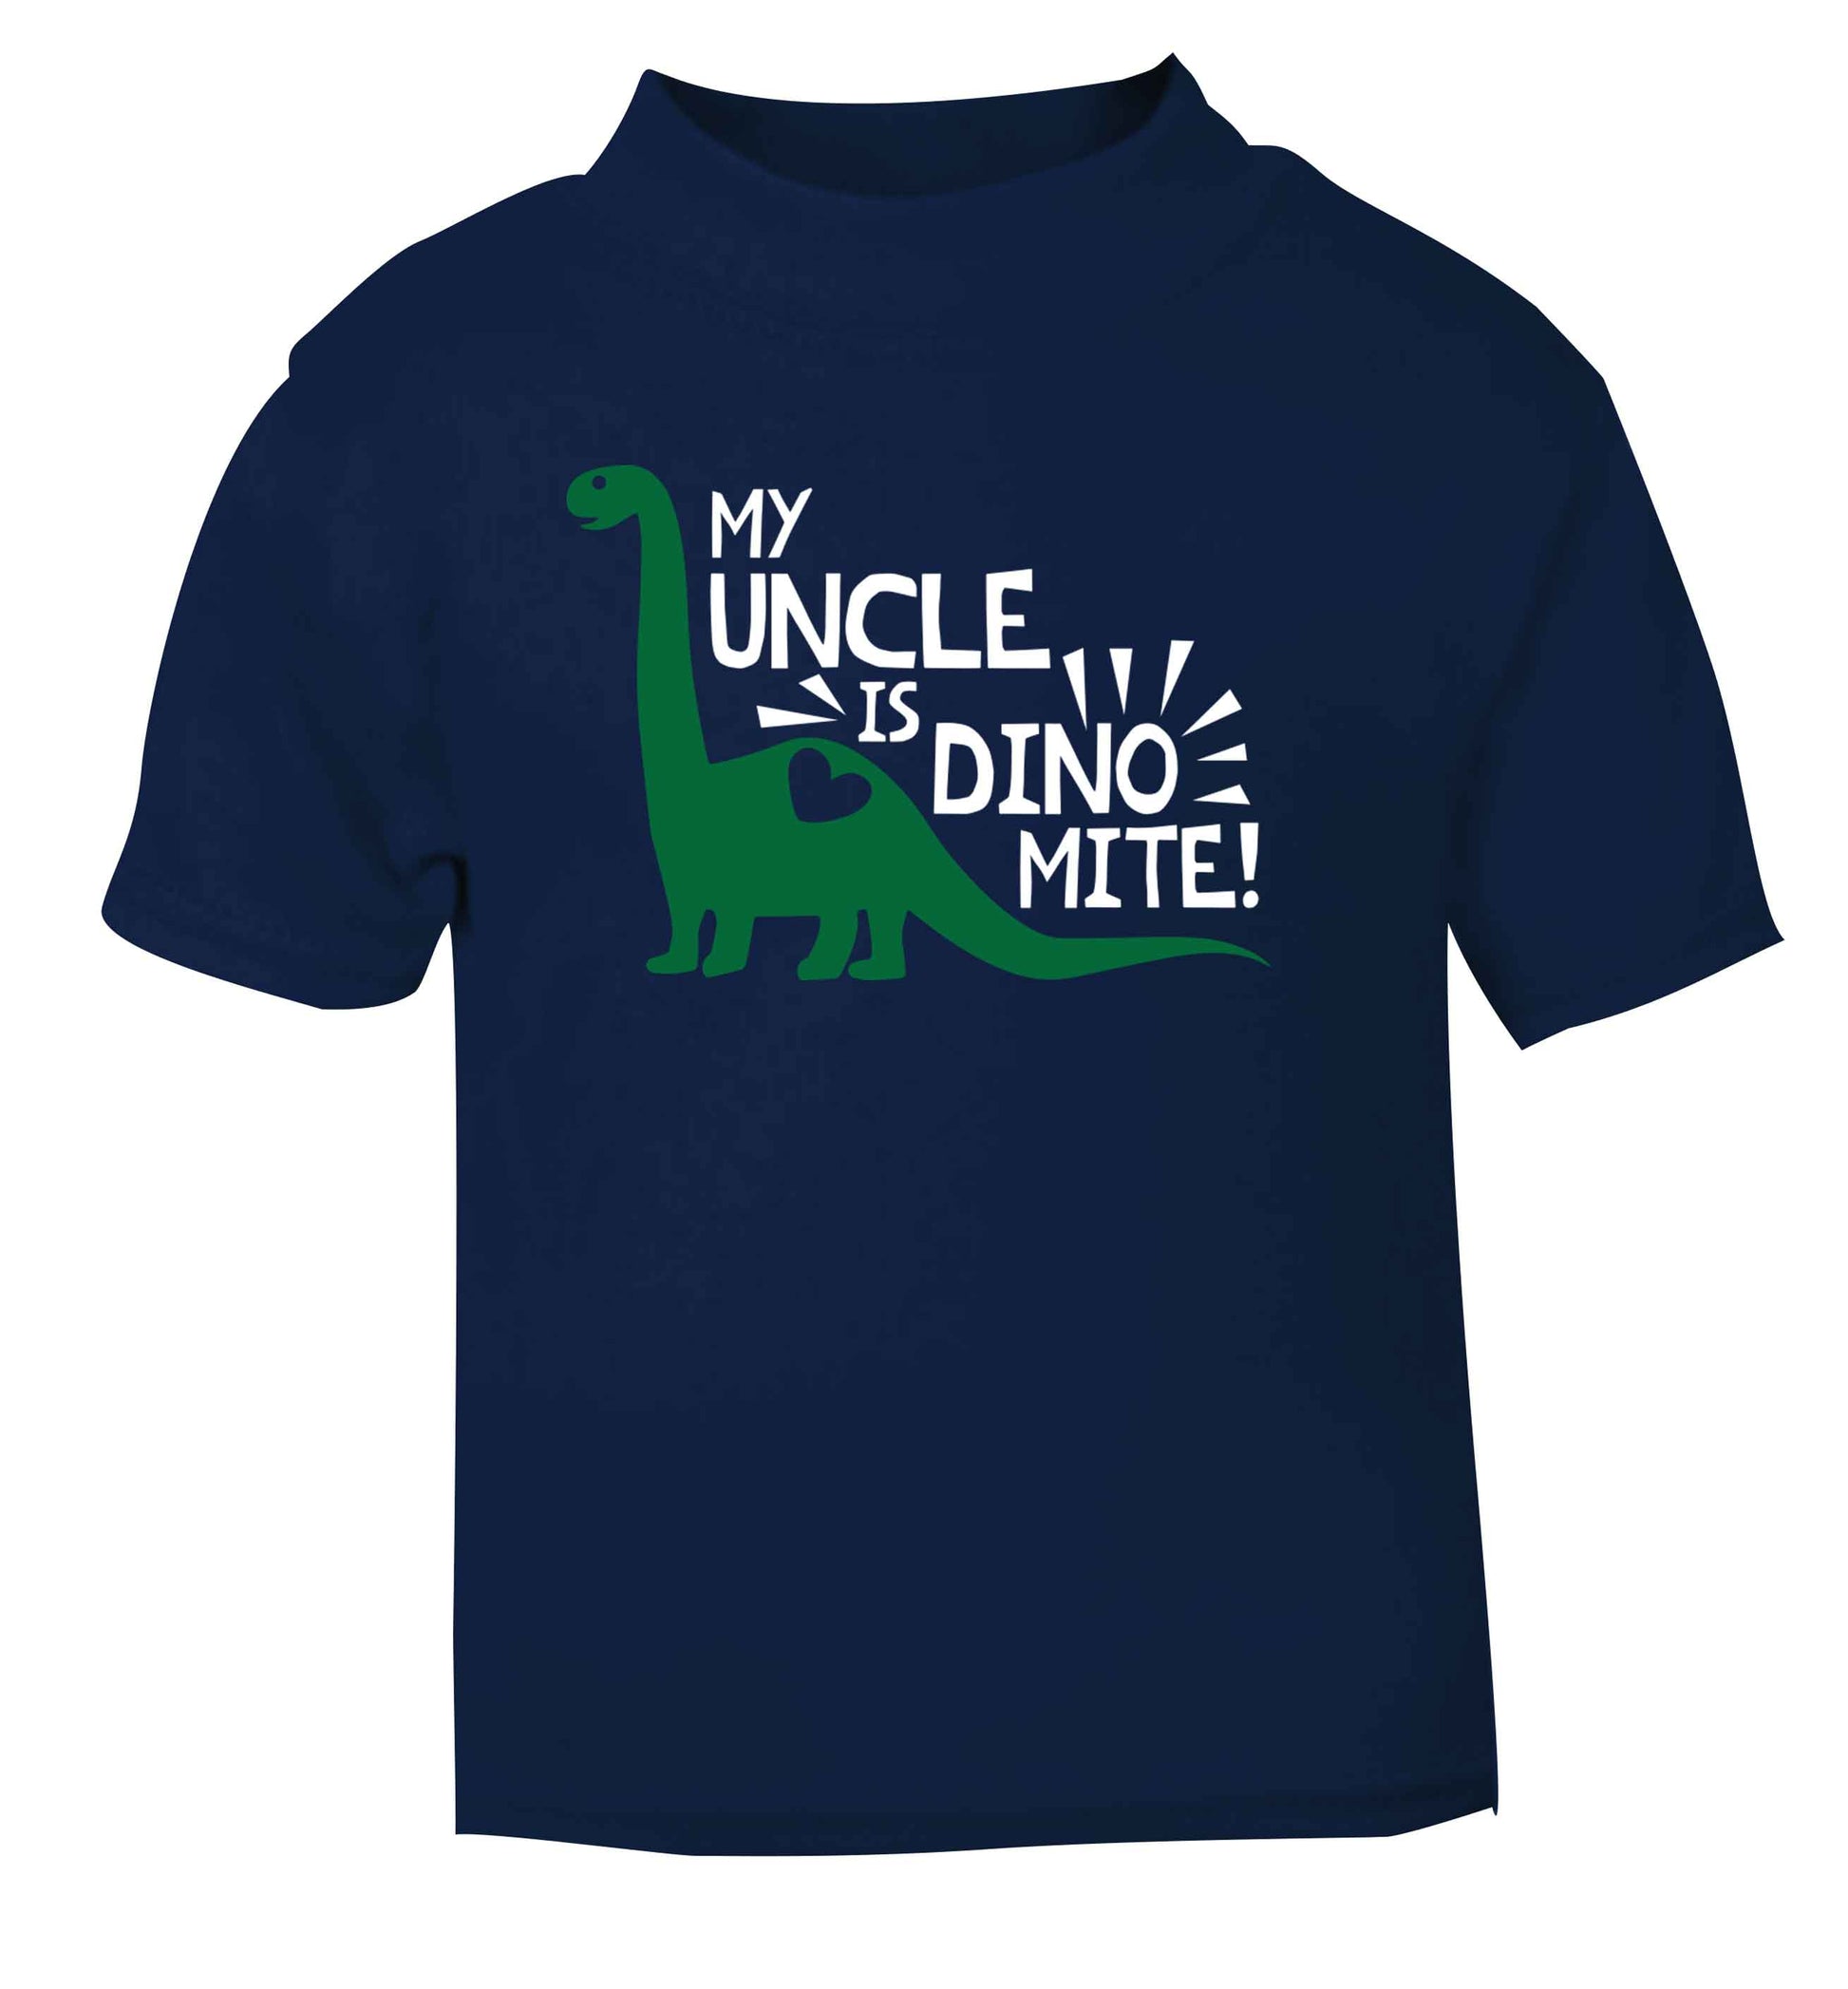 My uncle is dinomite! navy Baby Toddler Tshirt 2 Years